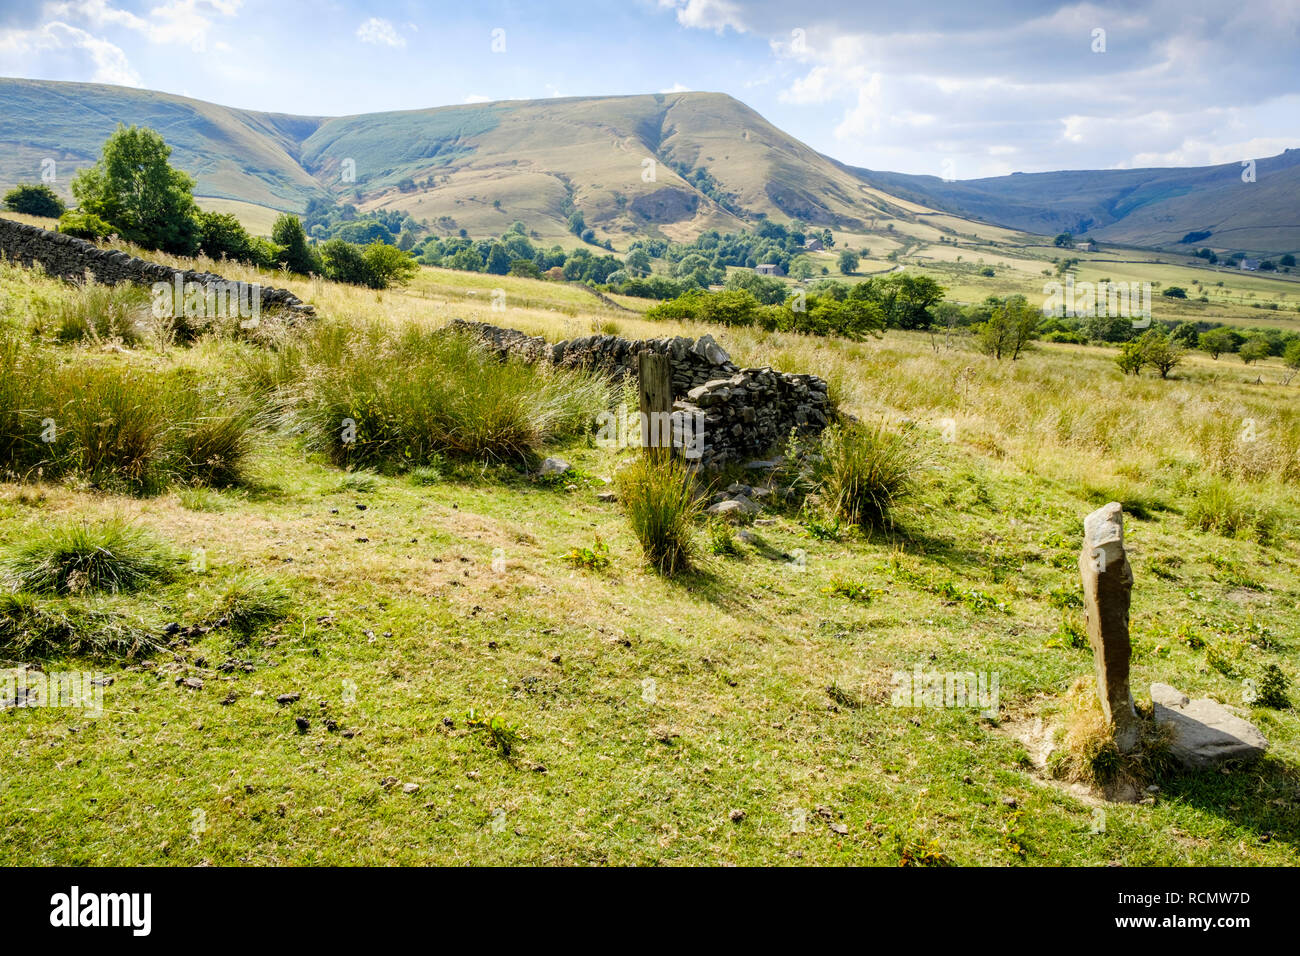 Summer sunshine on the hills and countryside of the Vale of Edale, Derbyshire, Peak District National Park, England, UK Stock Photo